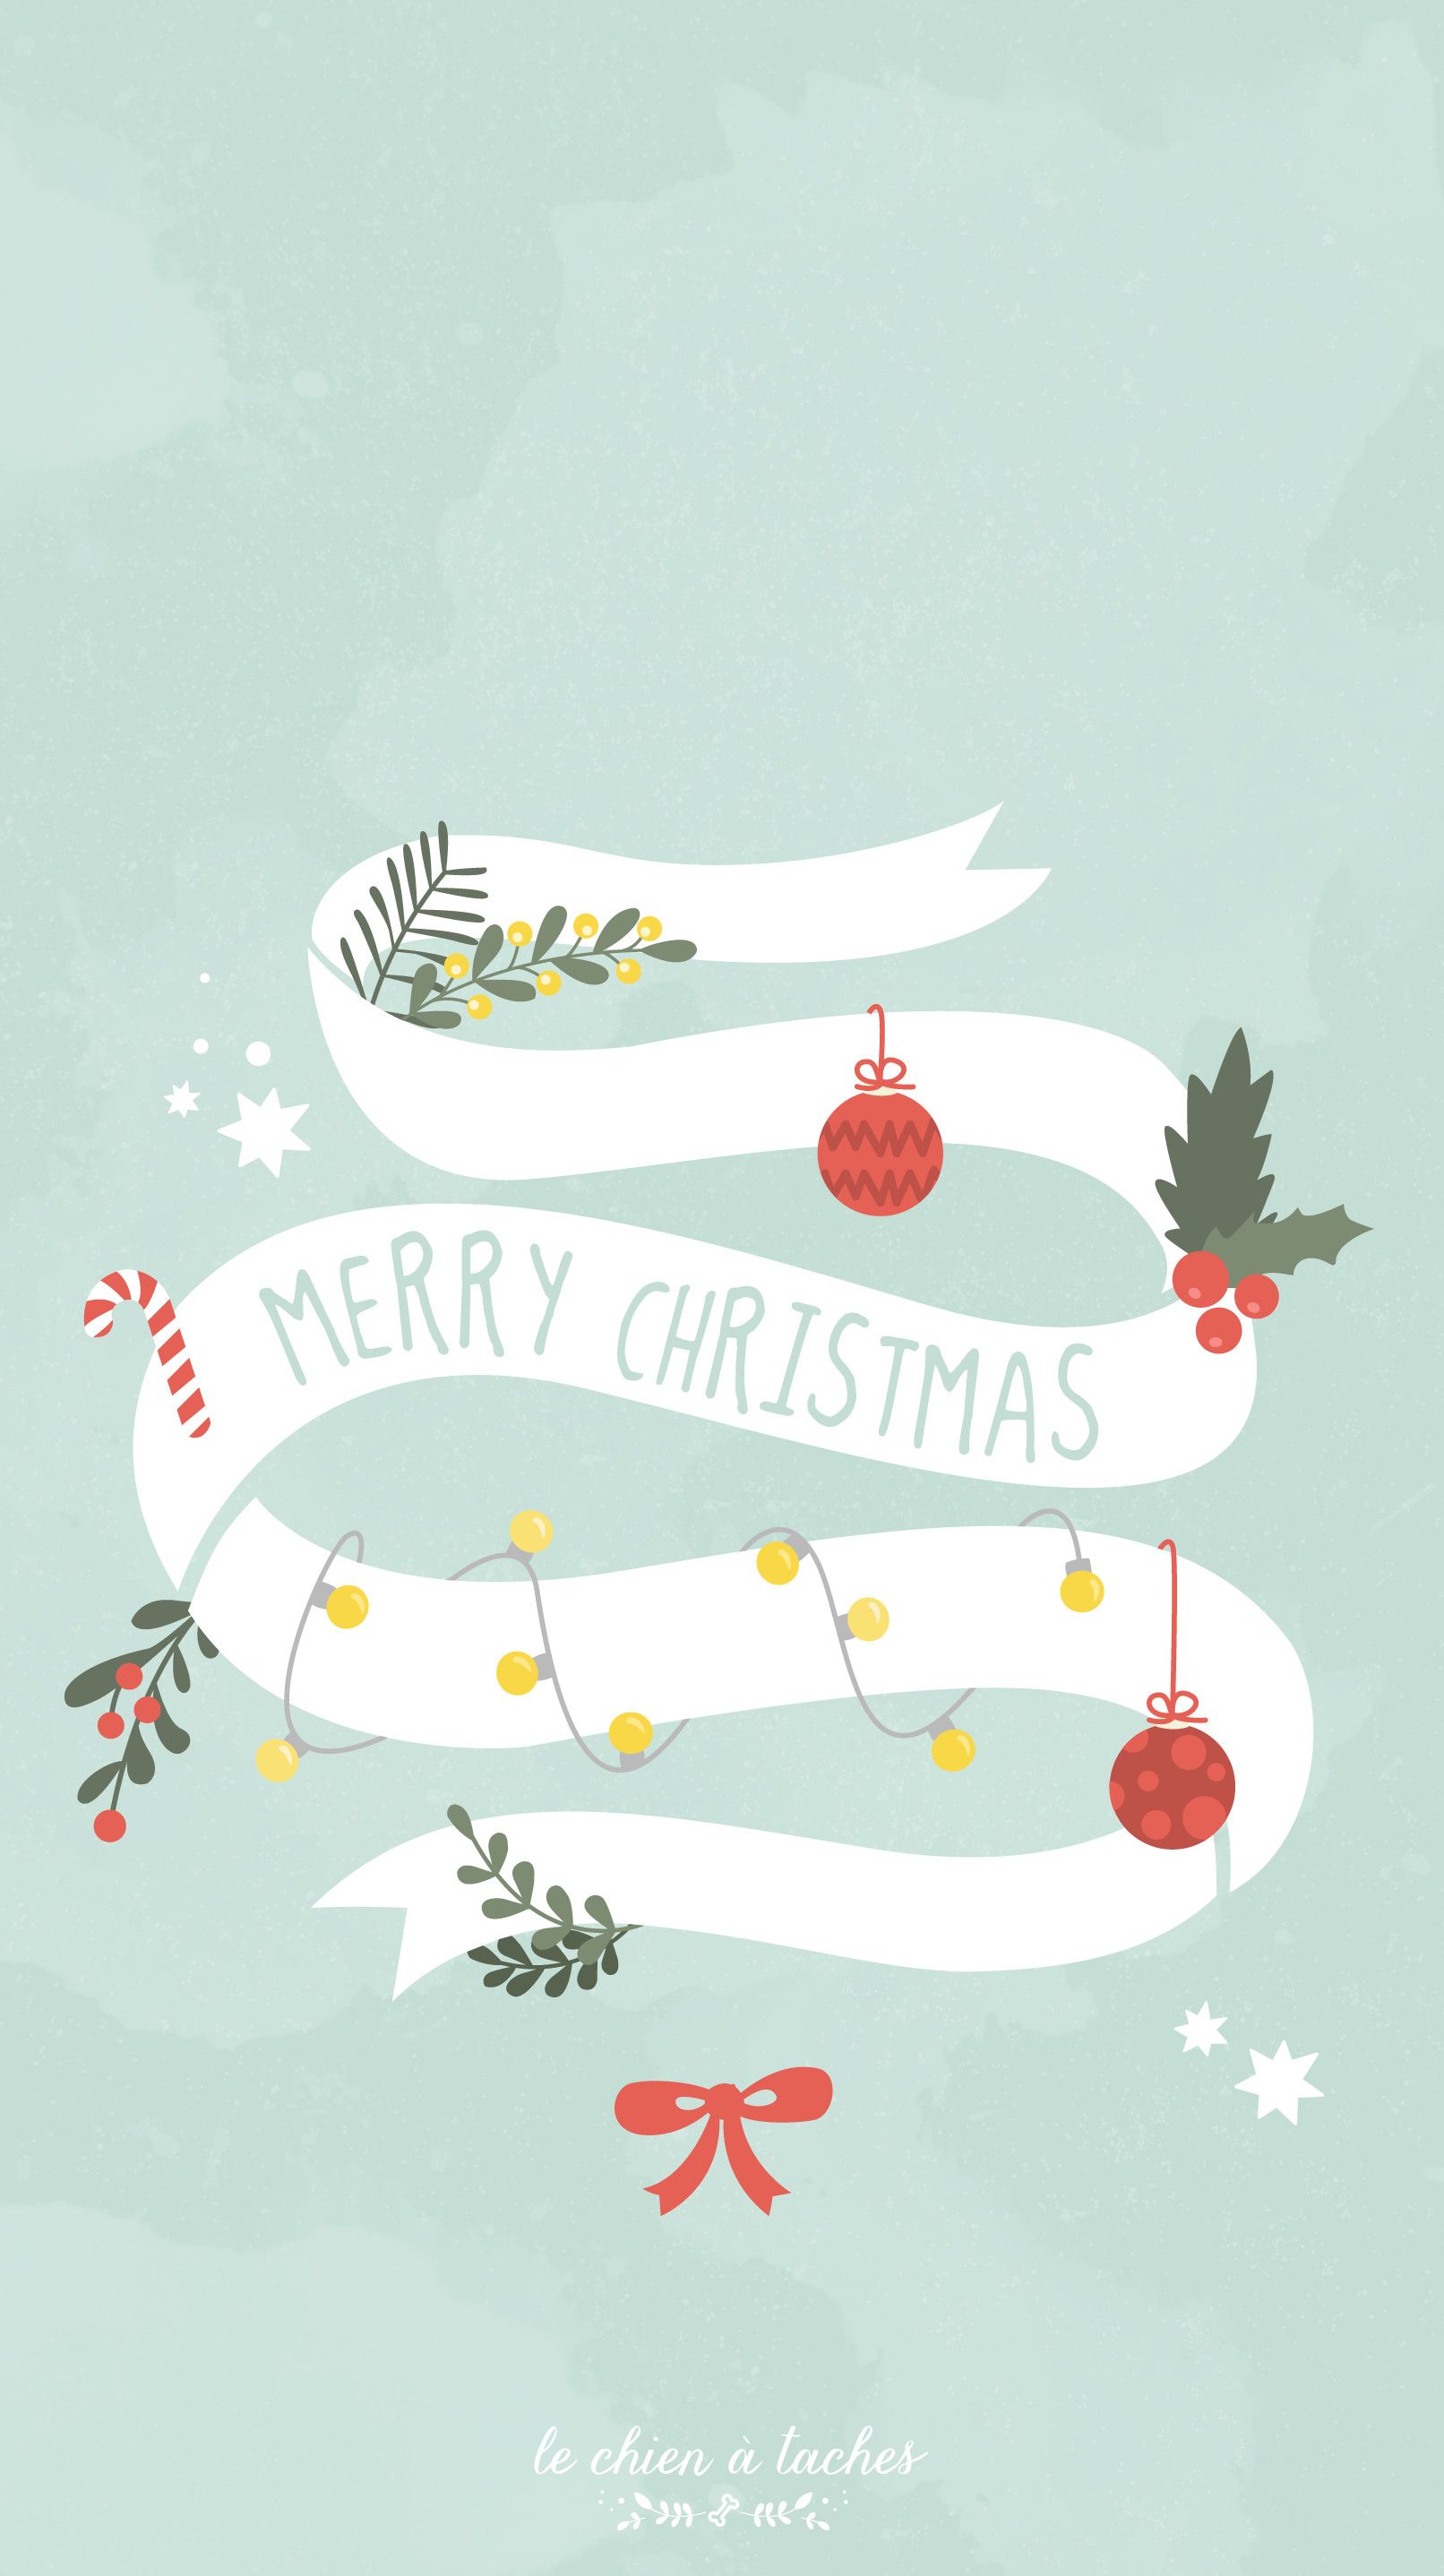 Christmas Images Wallpaper Cute : You can also upload and share your